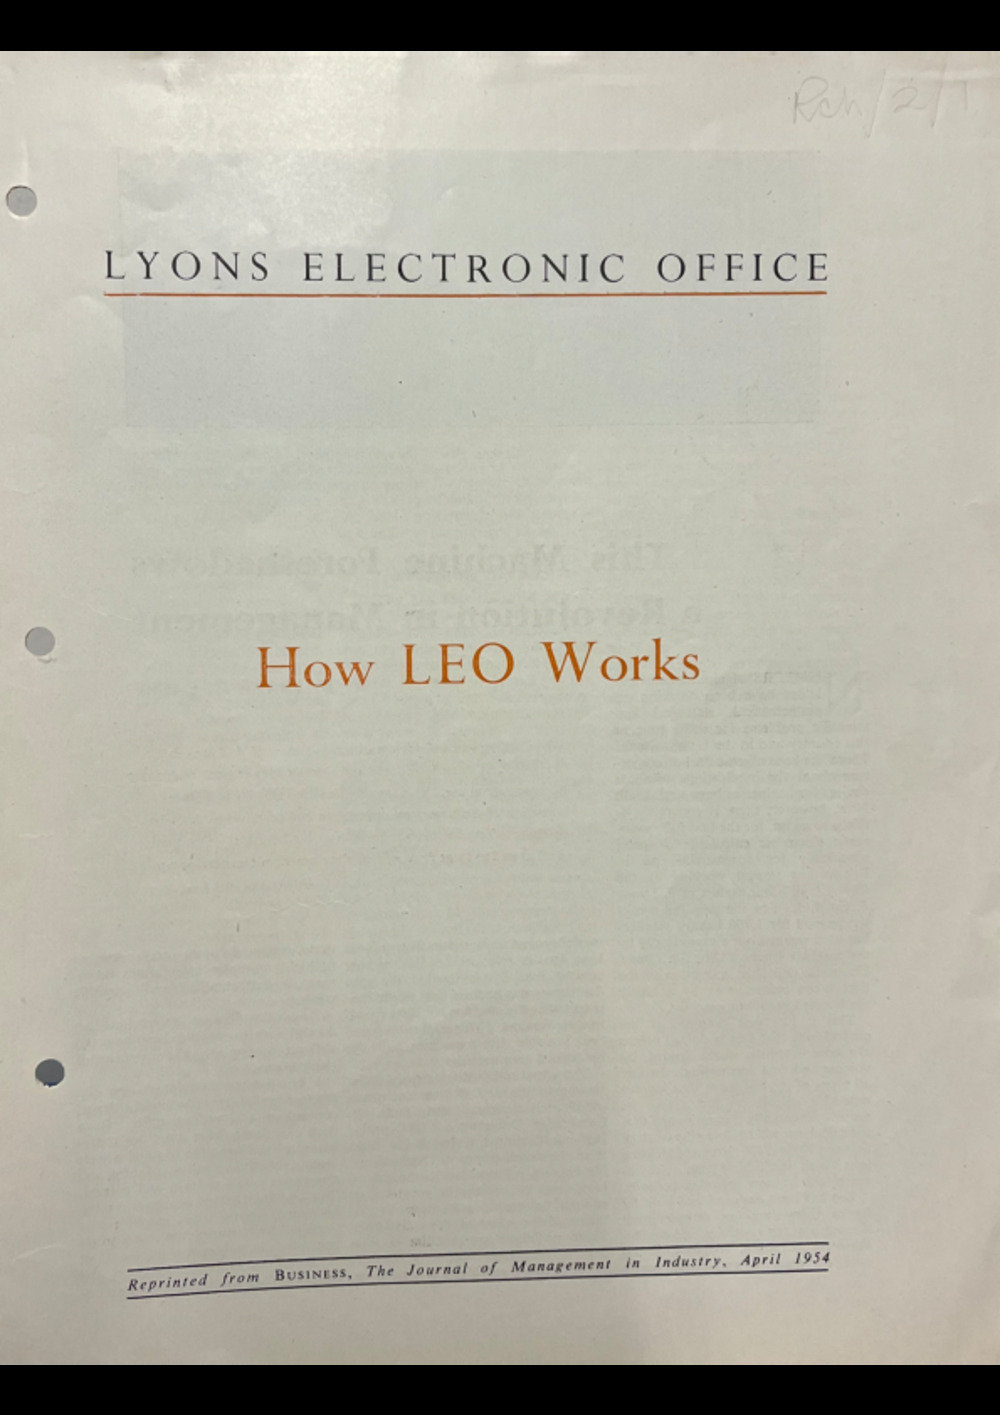 Article: Lyons Electronic Office: How LEO Works